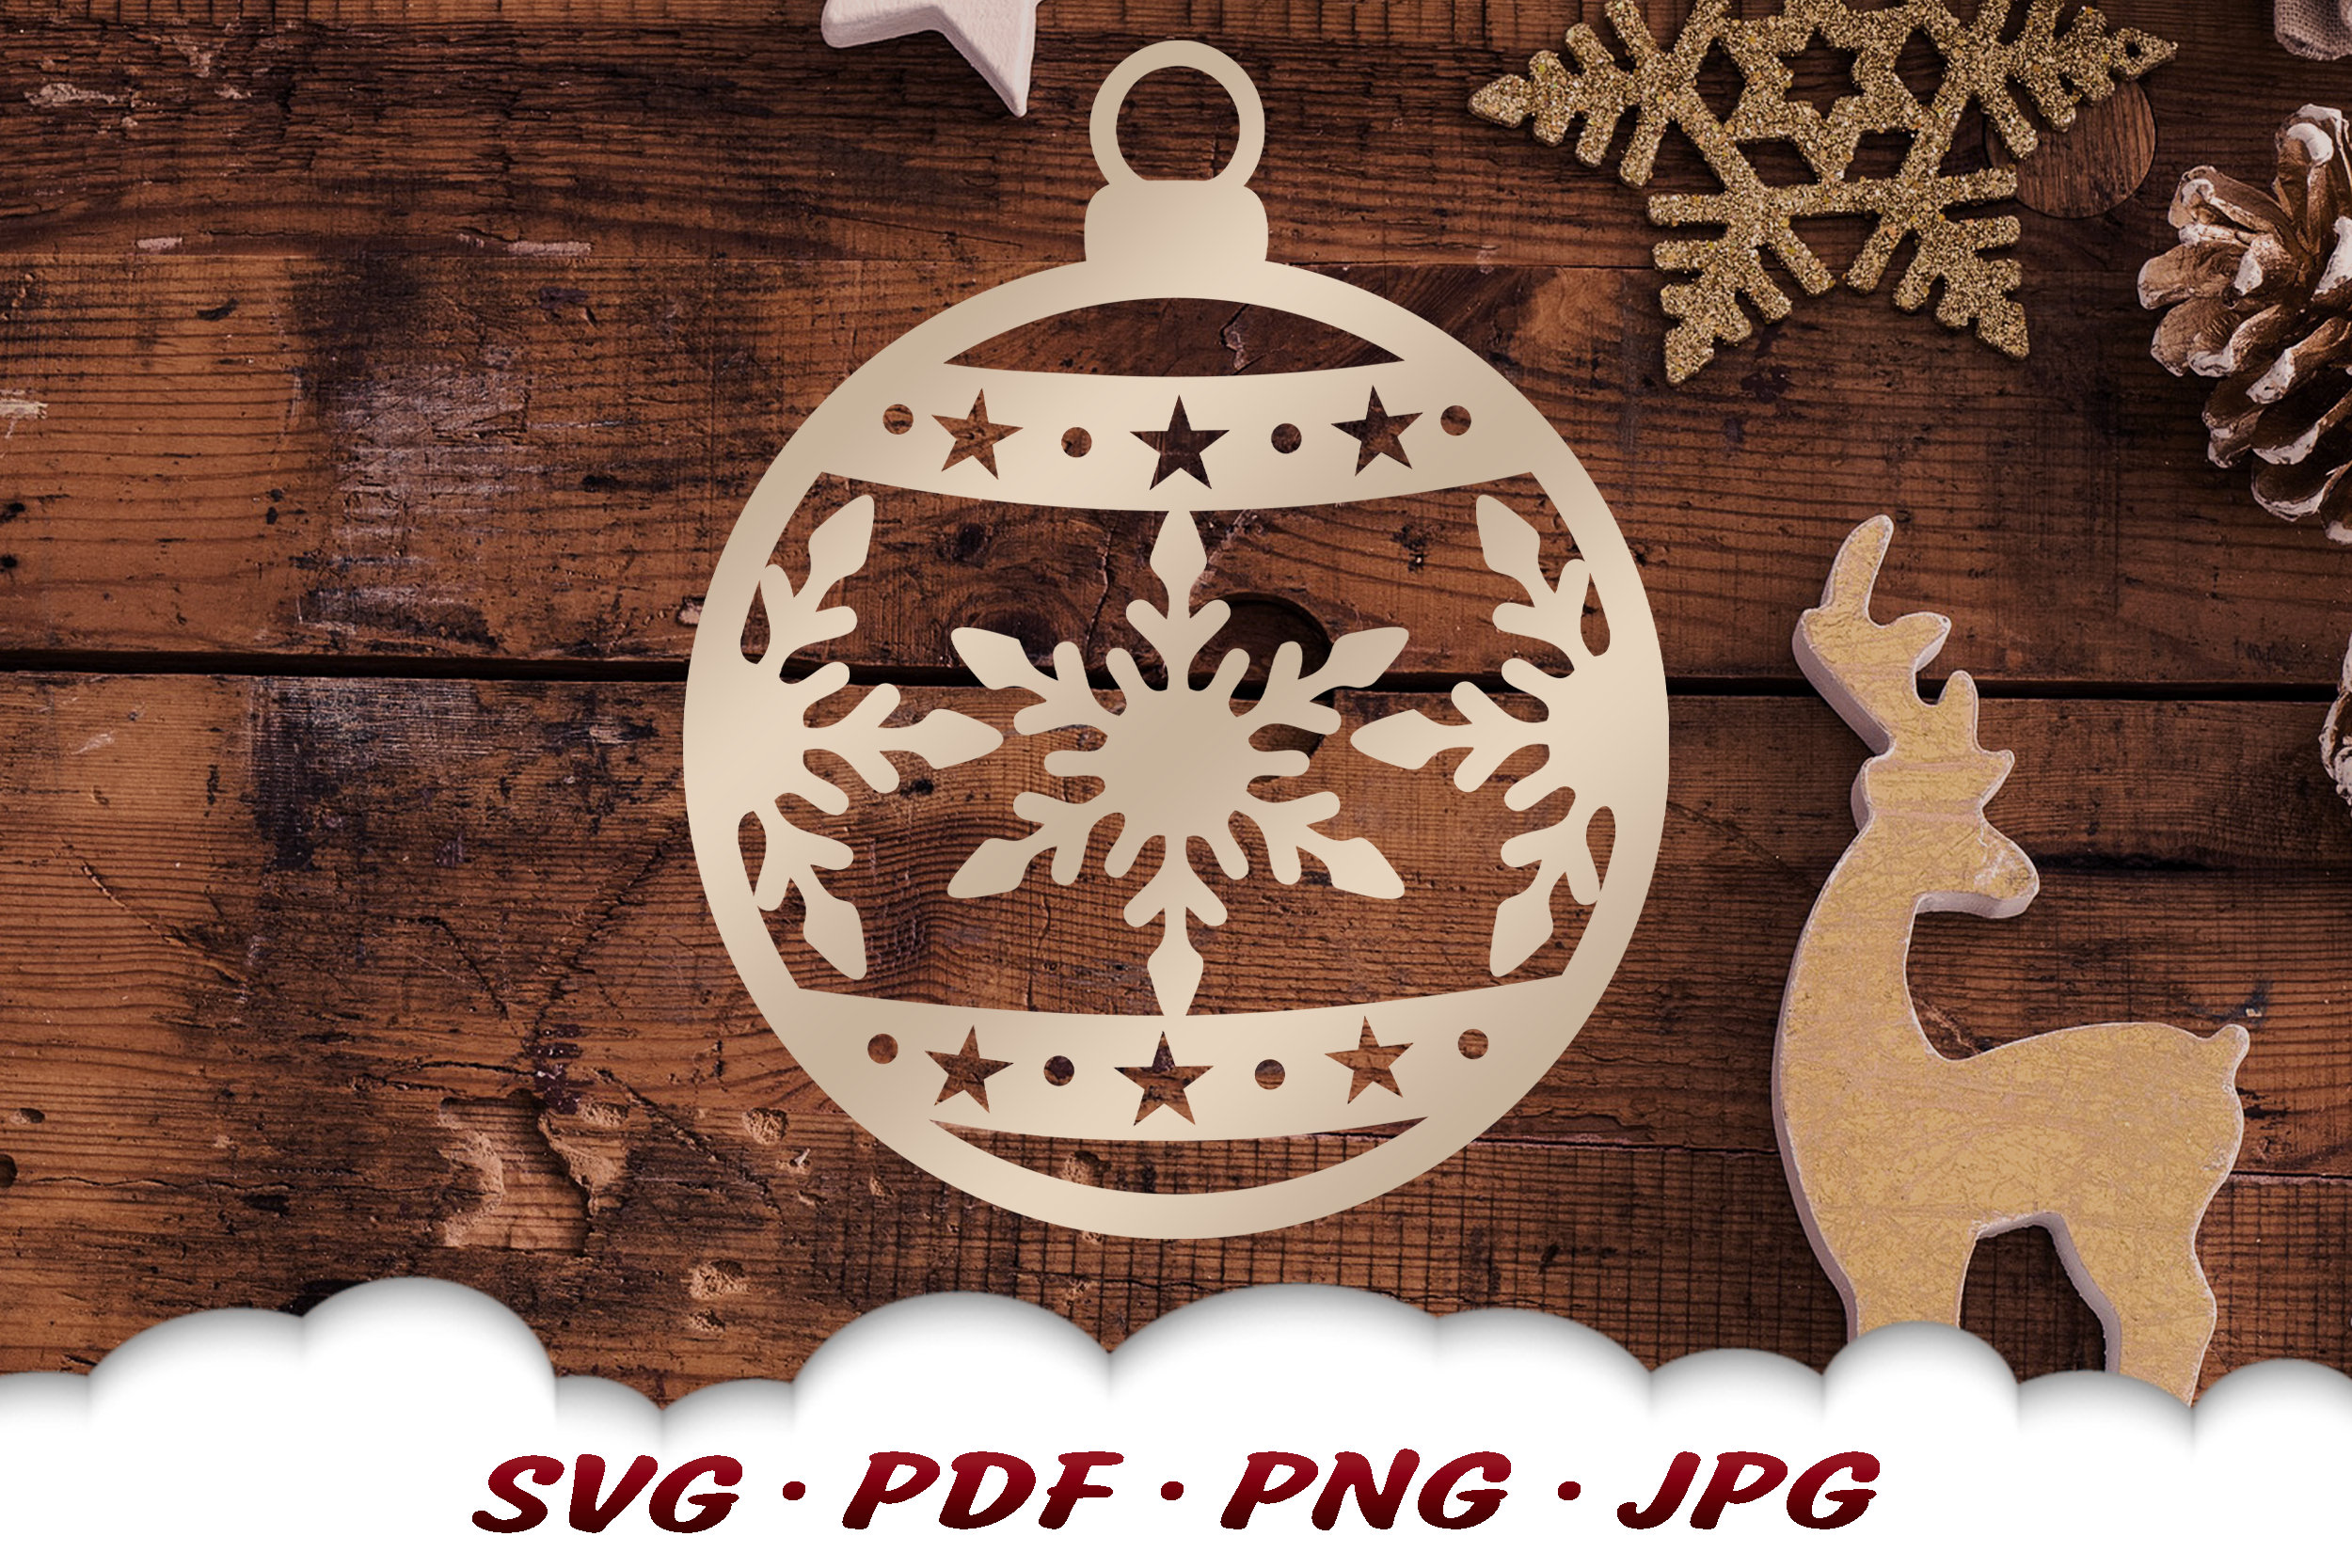 Snowflake Wooden Dreamcatcher Kits (Pack of 4) Christmas Crafts